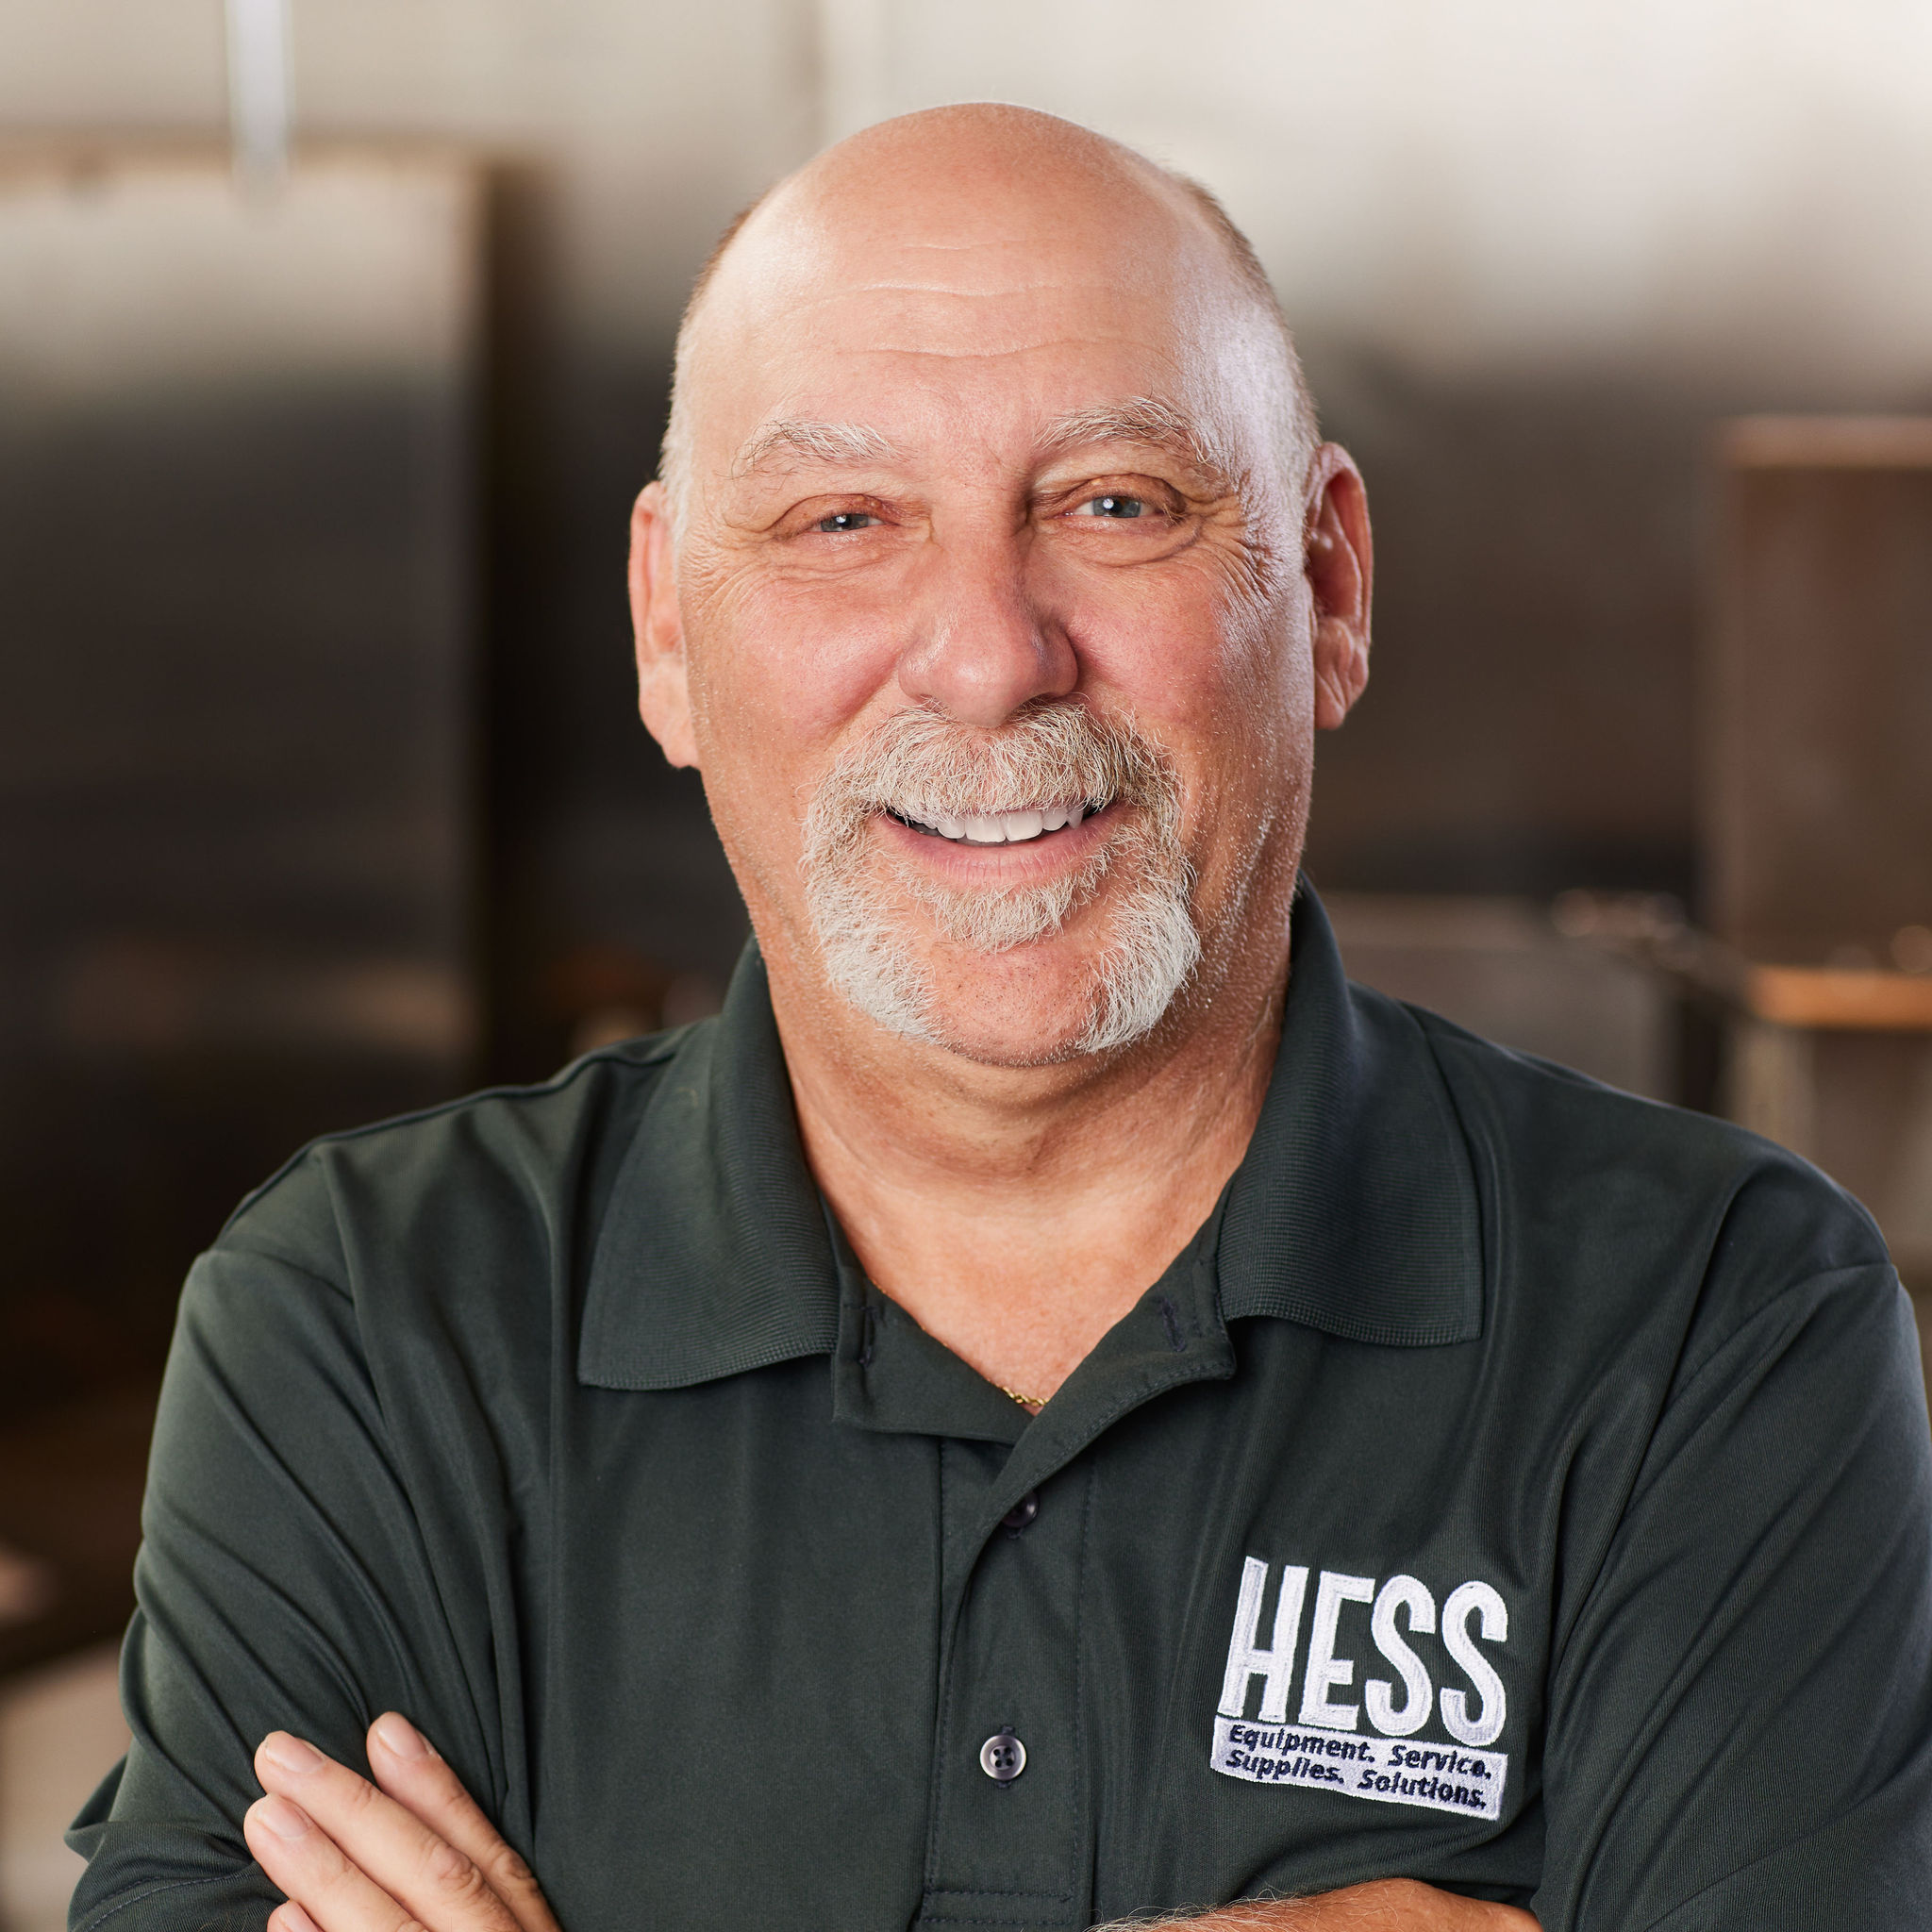 Mick Noce - Employee at Hess Meat Machines